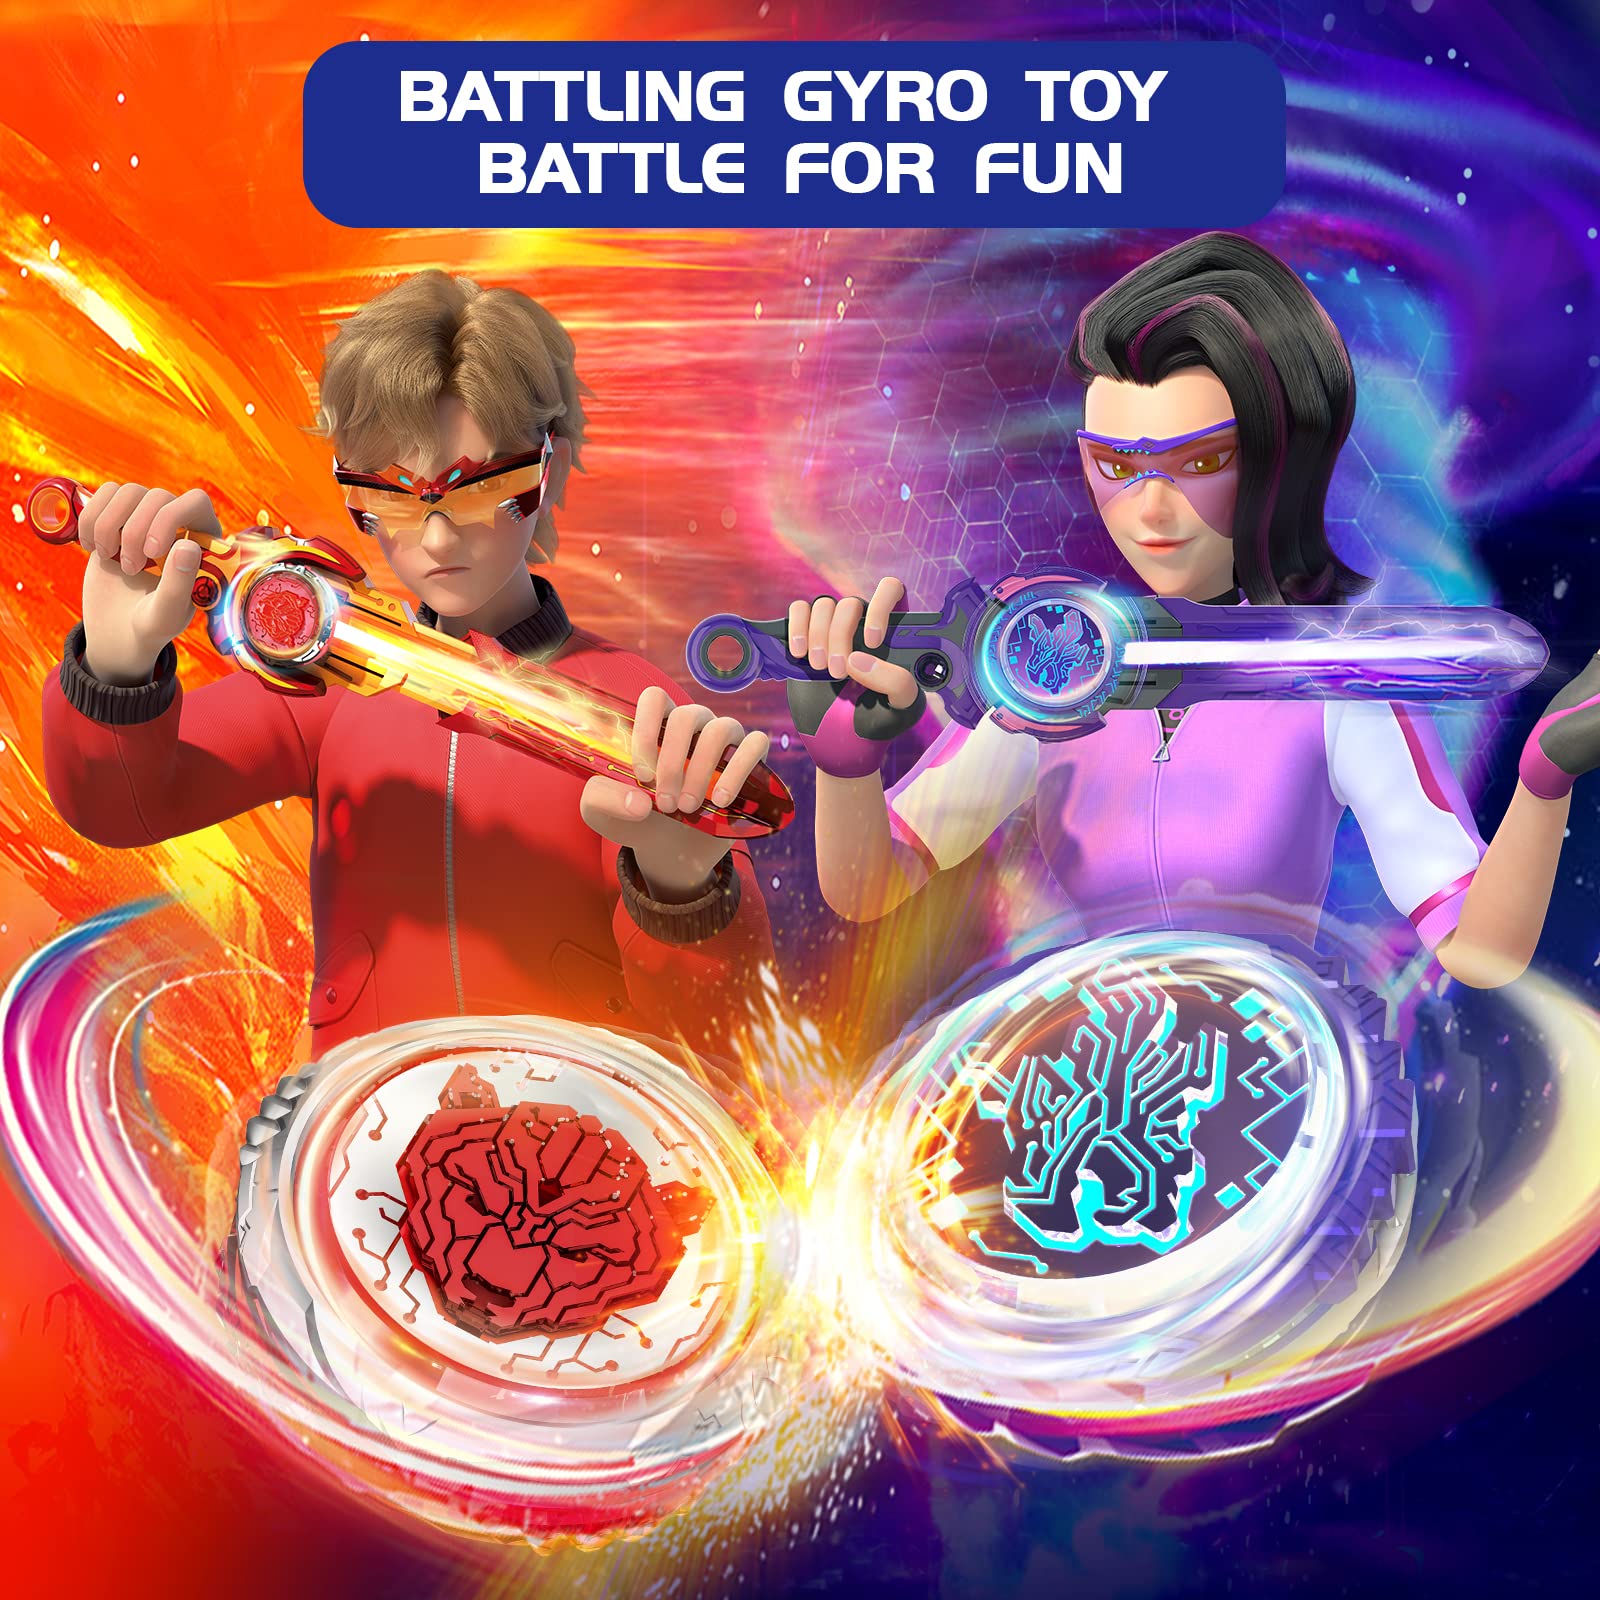 Infinity Nado Battling Top Burst Gyro Toy, Spinning Top w/Sword Launcher, Battle Game Set Toys for 5 6 7 8 9 10 Years Old Boys Girls, Gifts for Boys Girls Kids - Dream World Magic Dragon